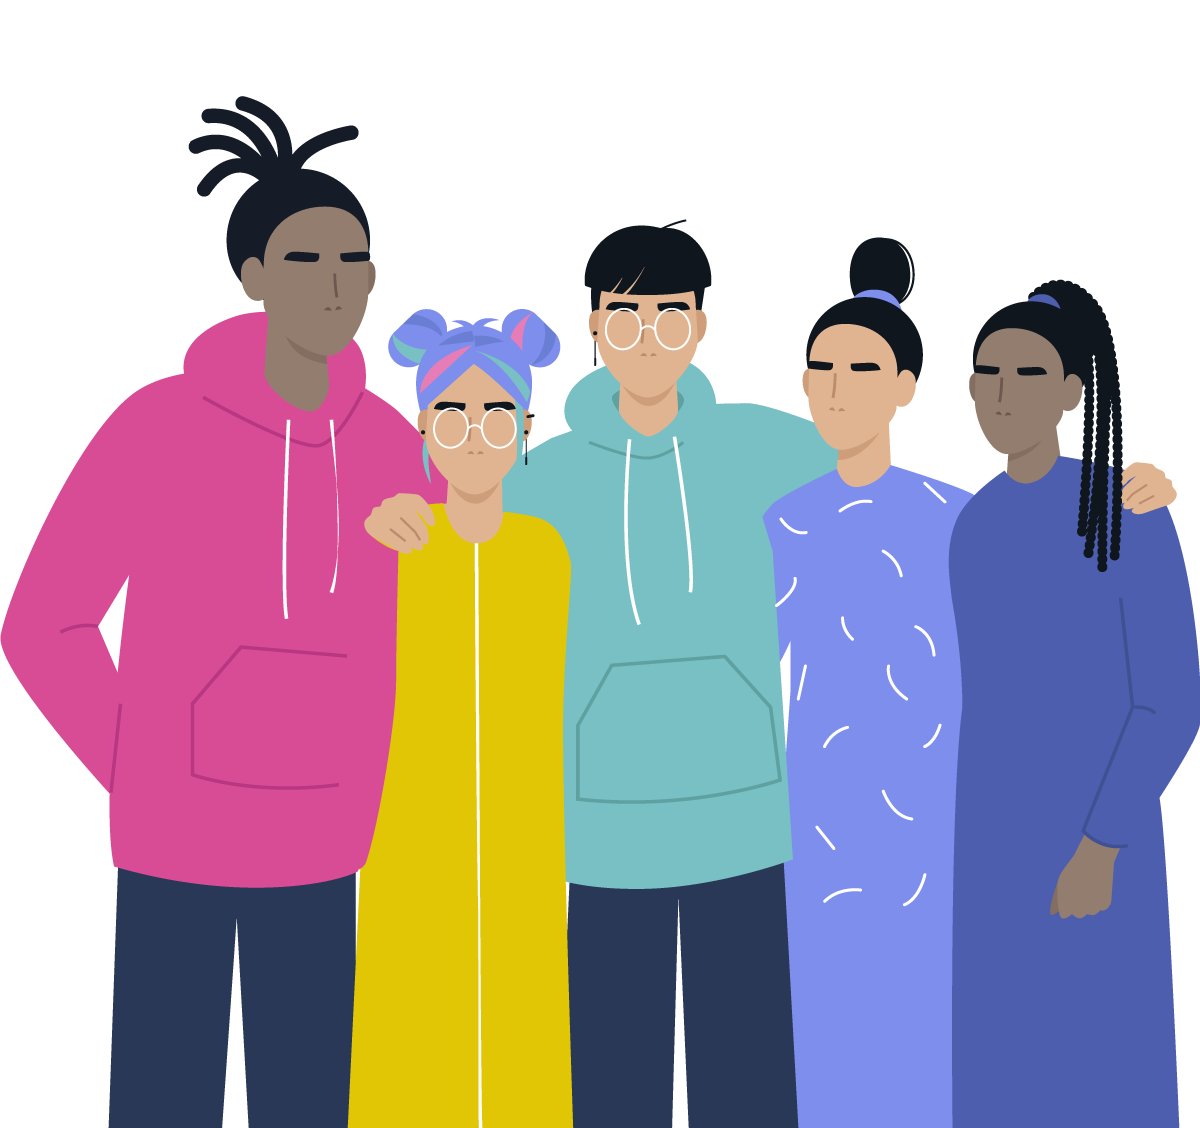 Illustration of LGBTQ, diverse group of people hugging each other